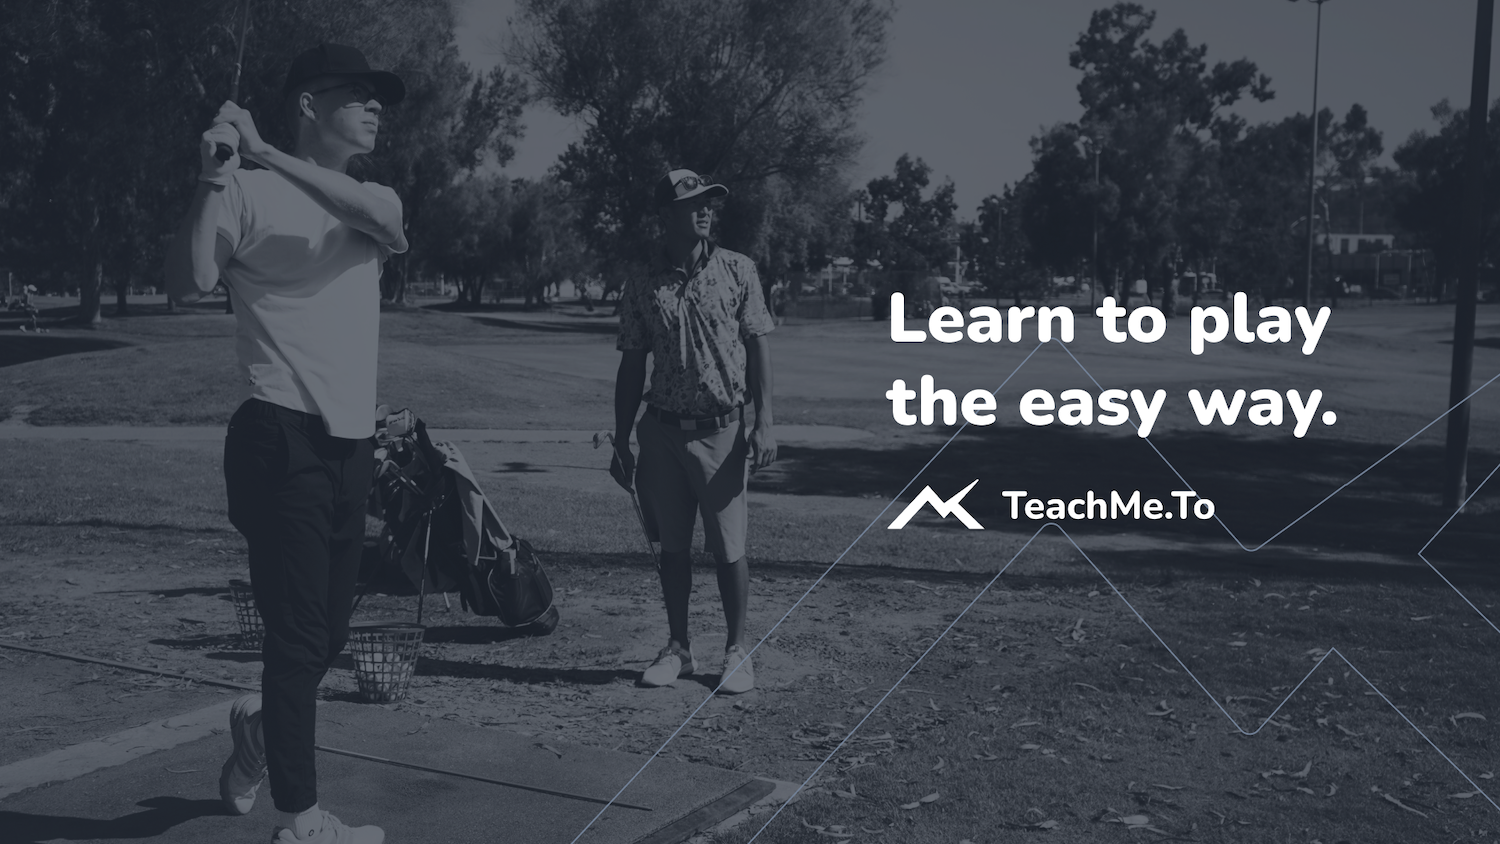 People playing baseball in a TeachMe.To. infographic